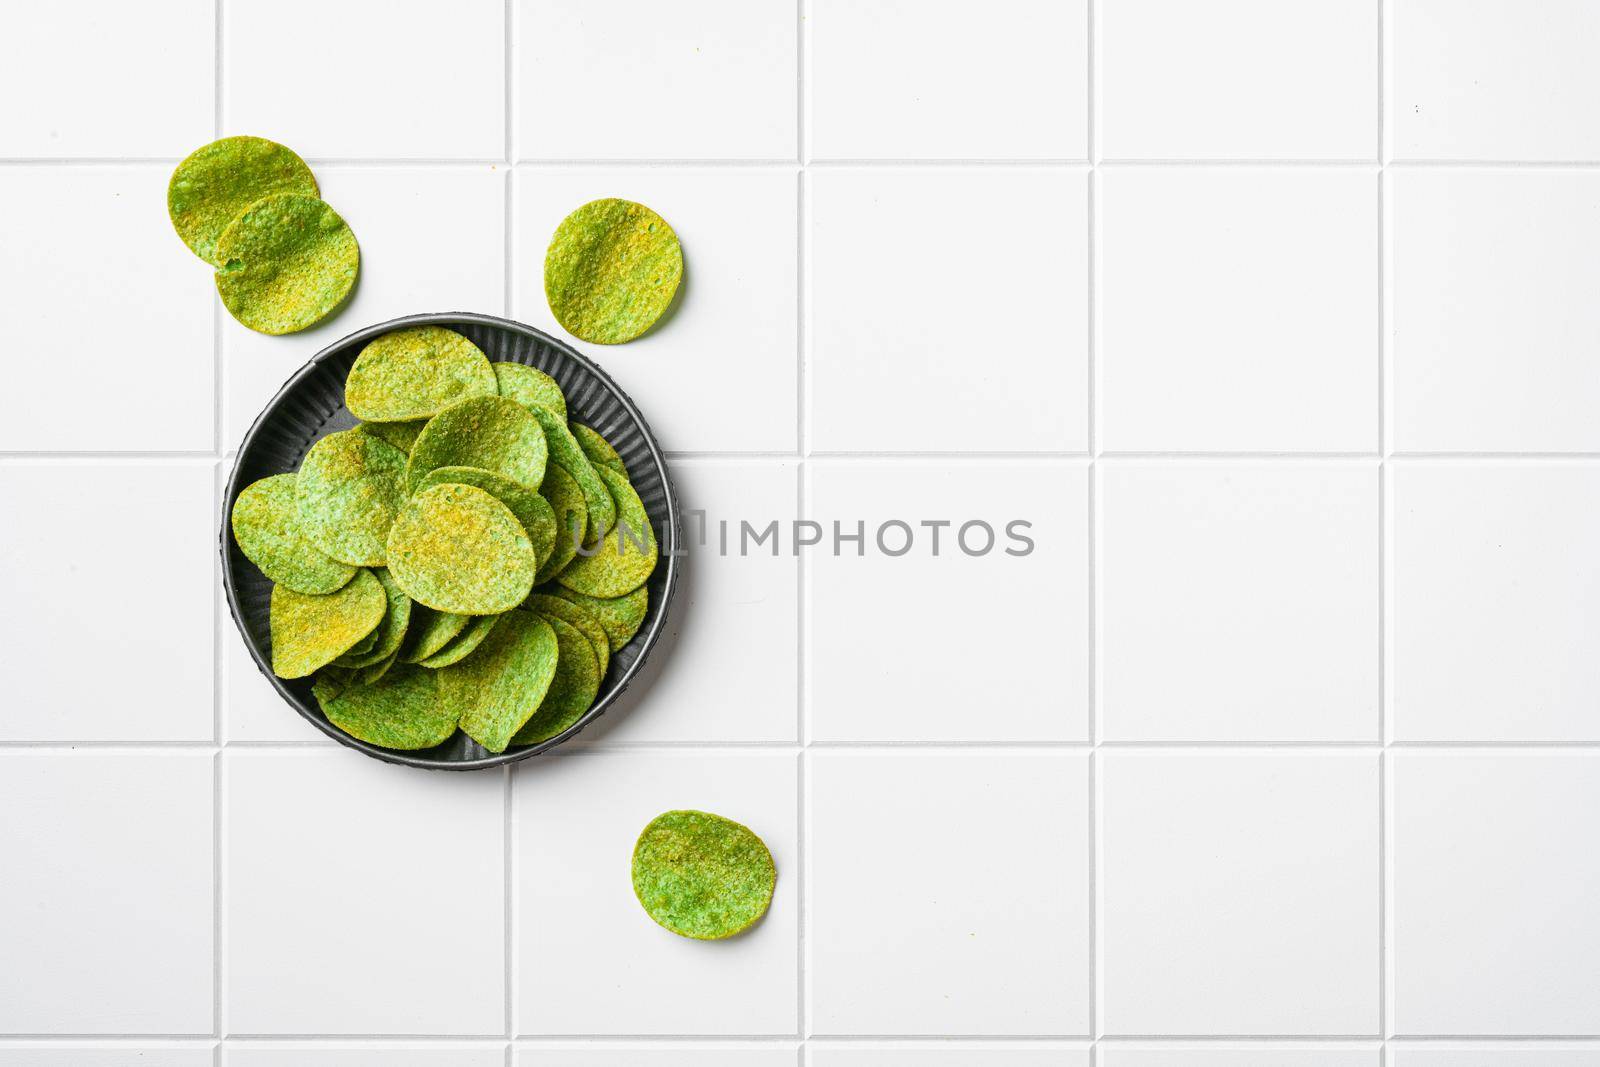 Green Chile Limon Flavored Potato Chips on white ceramic squared tile table background, top view flat lay, with copy space for text by Ilianesolenyi